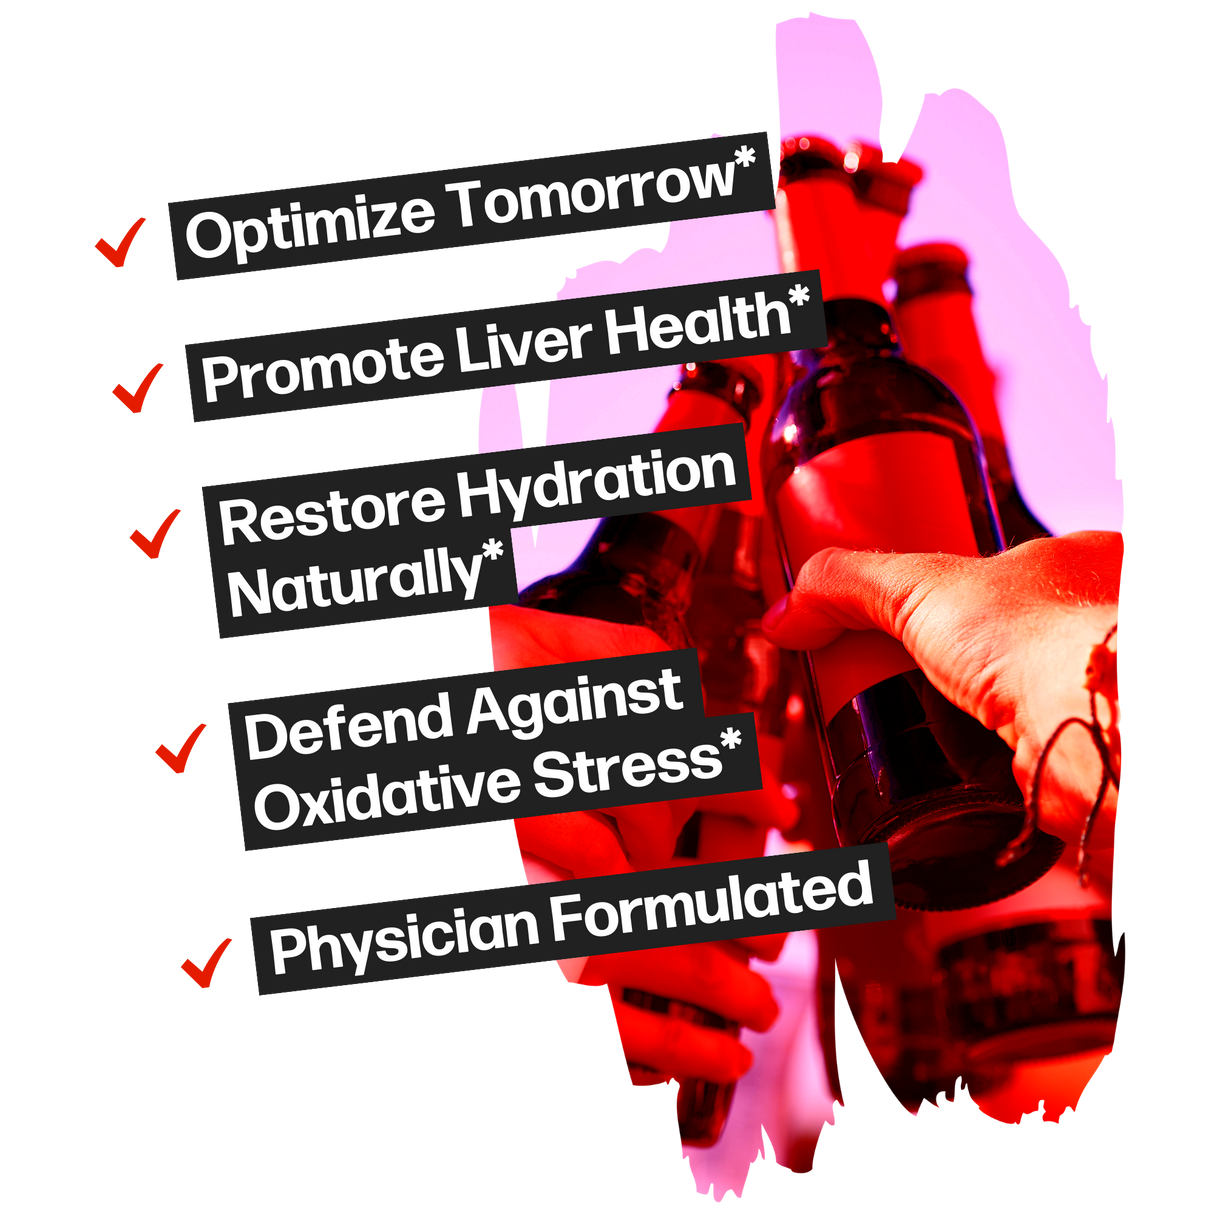 Life Happns Pour Decisions Alcohol Metabolism Supplement Benefits Listed as Optimize Tomorrow, Promote Liver Health, Restore Hydration Naturally, Defend Against Oxidative Stress, and Physician Formulated